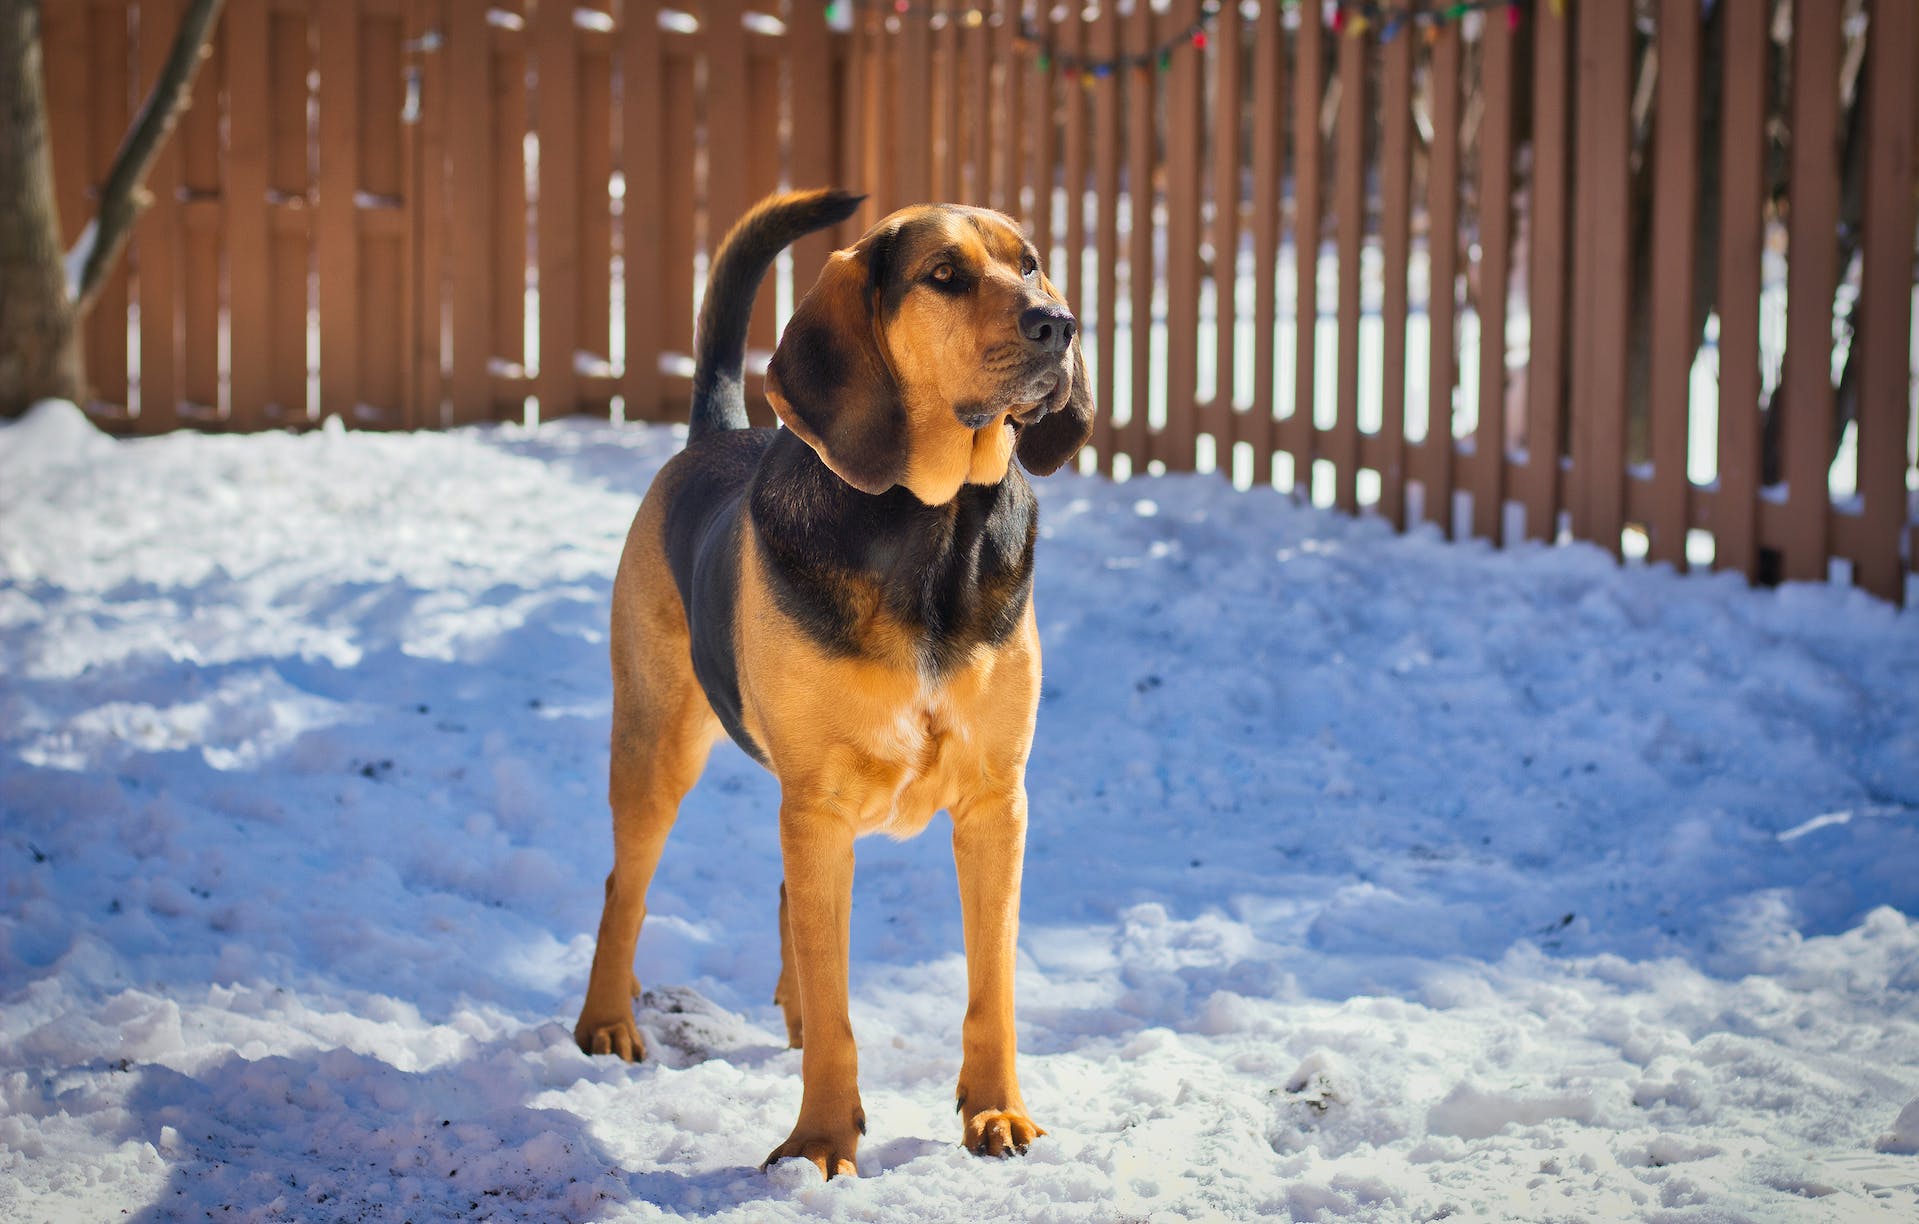 A bloodhound puppy standing outdoors in the snow